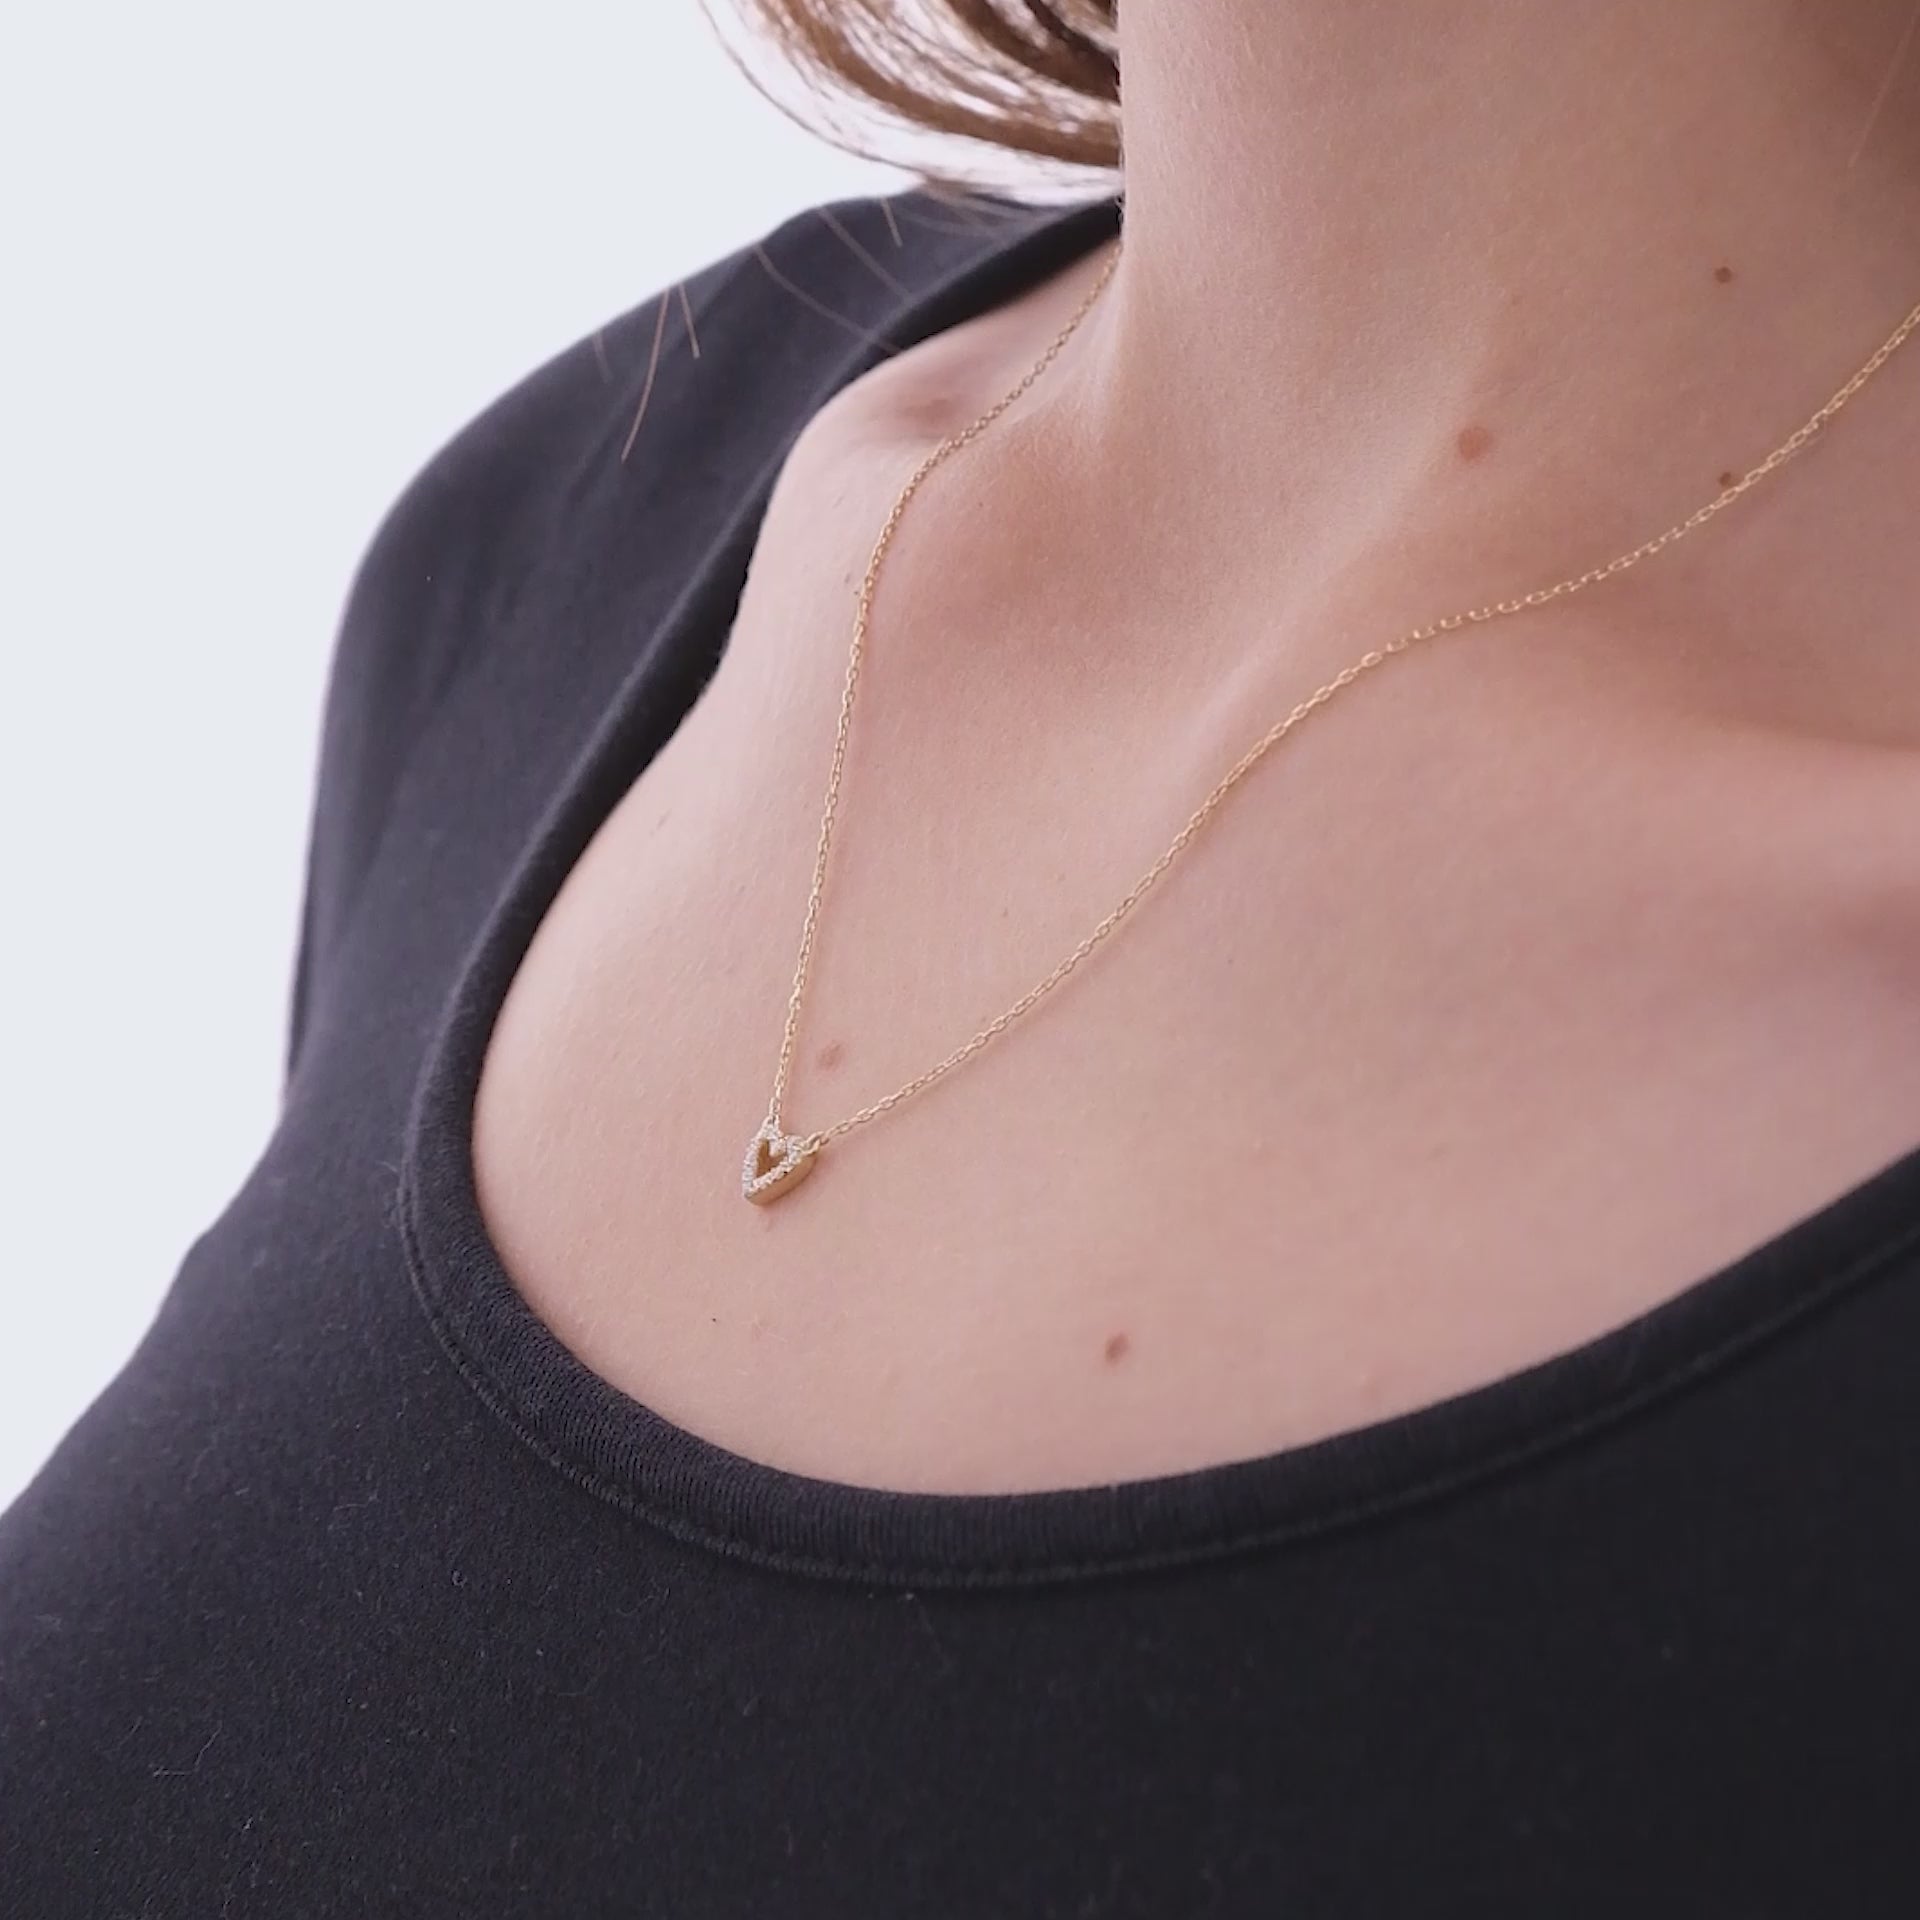 9ct Yellow Gold Double Open Heart & Bead Necklace | H.Samuel